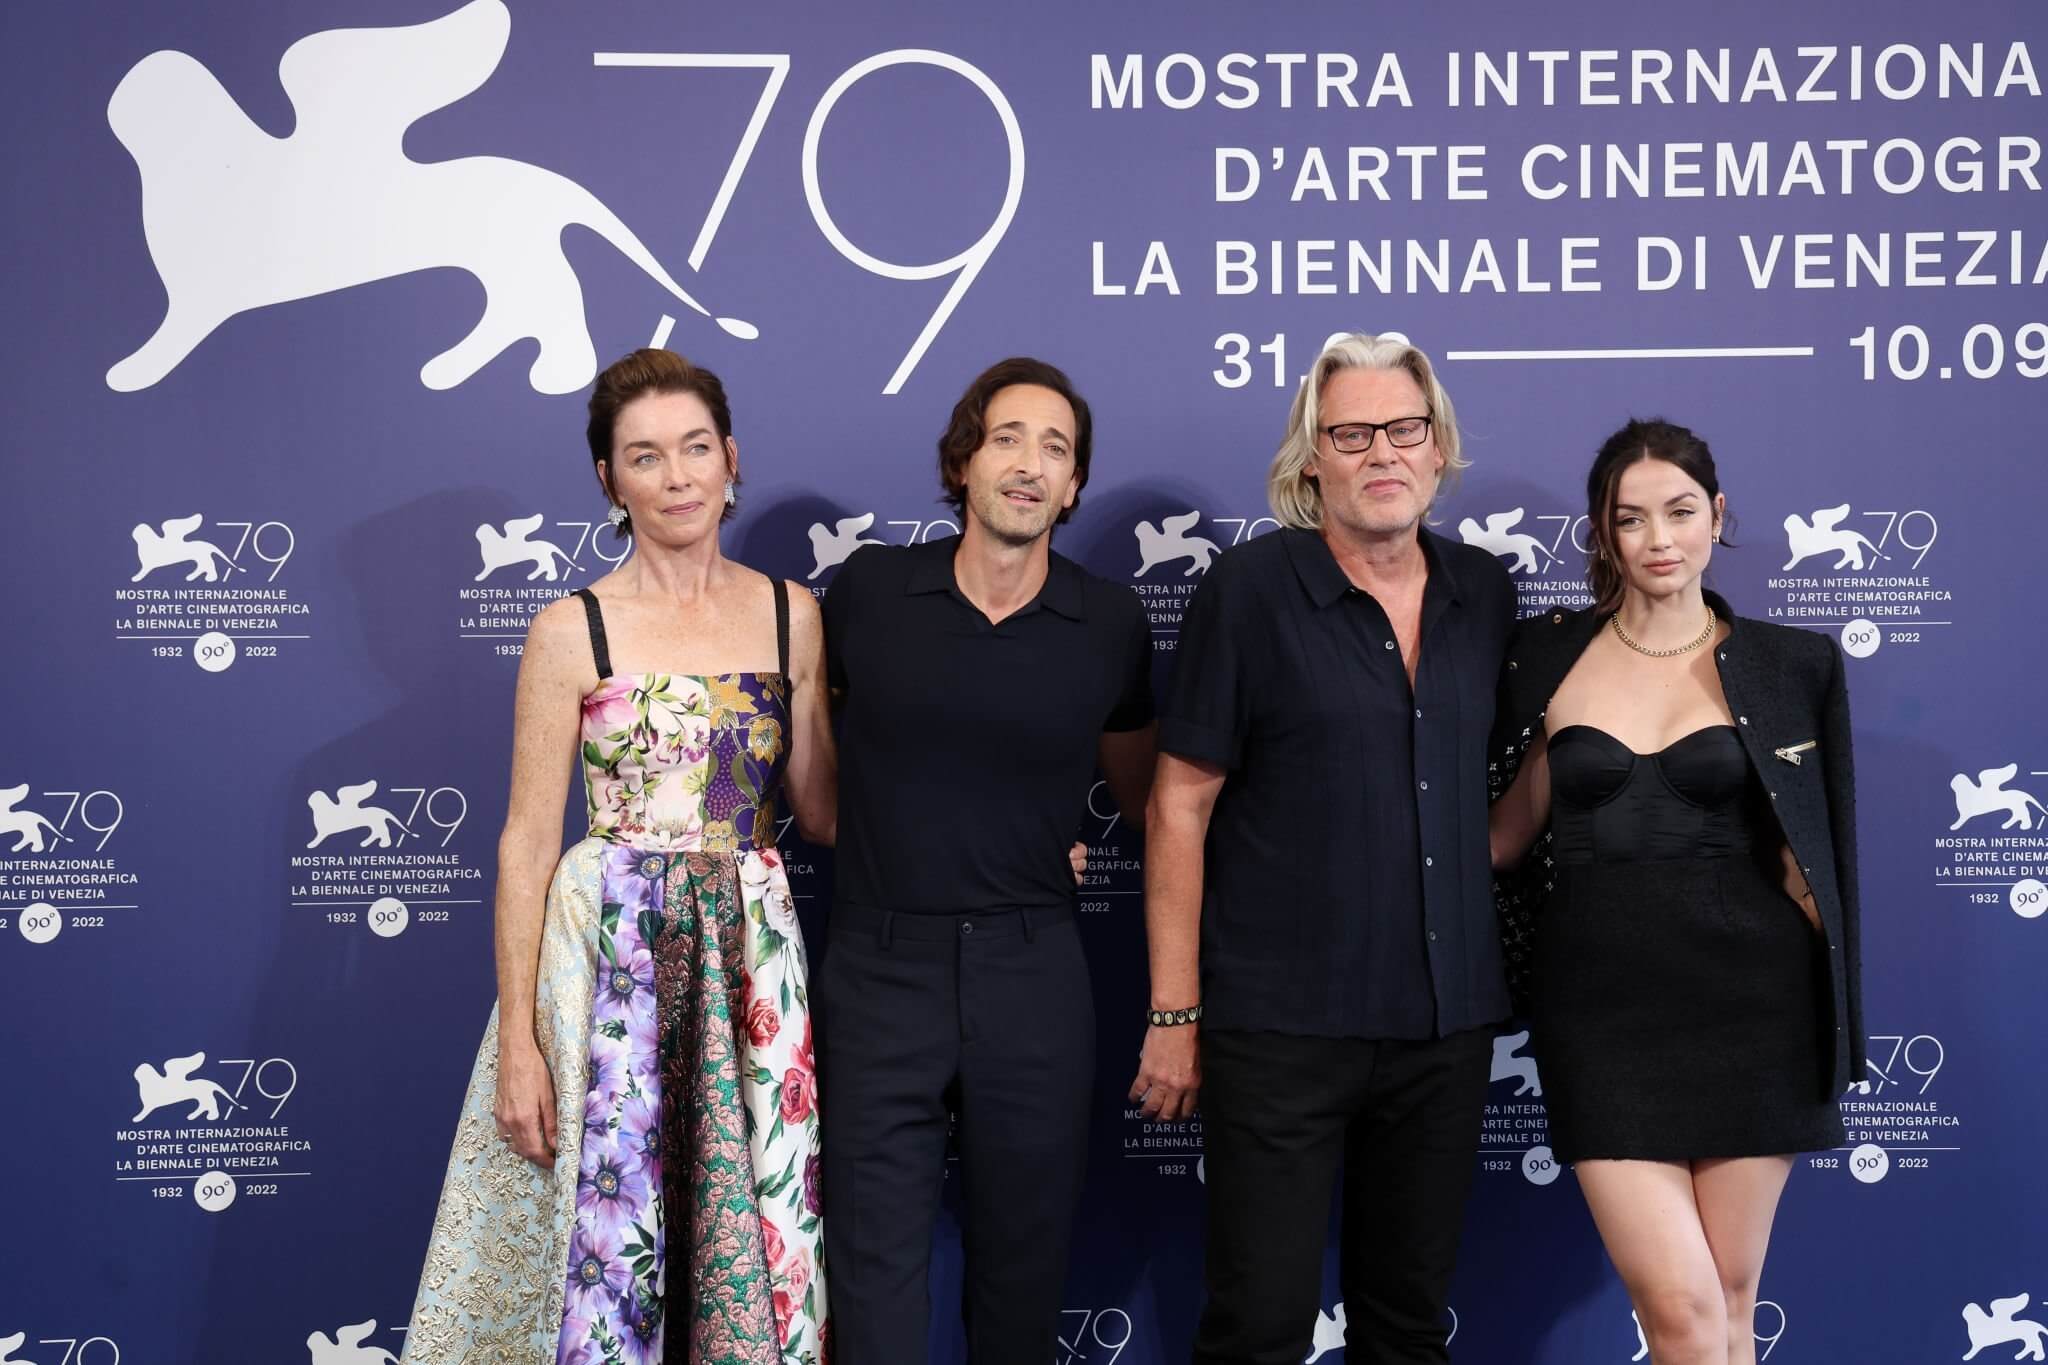 Julianne Nicholson, Adrien Brody, Andrew Dominik and Ana de Armas attend the photocall for "Blonde" at the 79th Venice International Film Festival on September 08, 2022 in Venice, Italy.